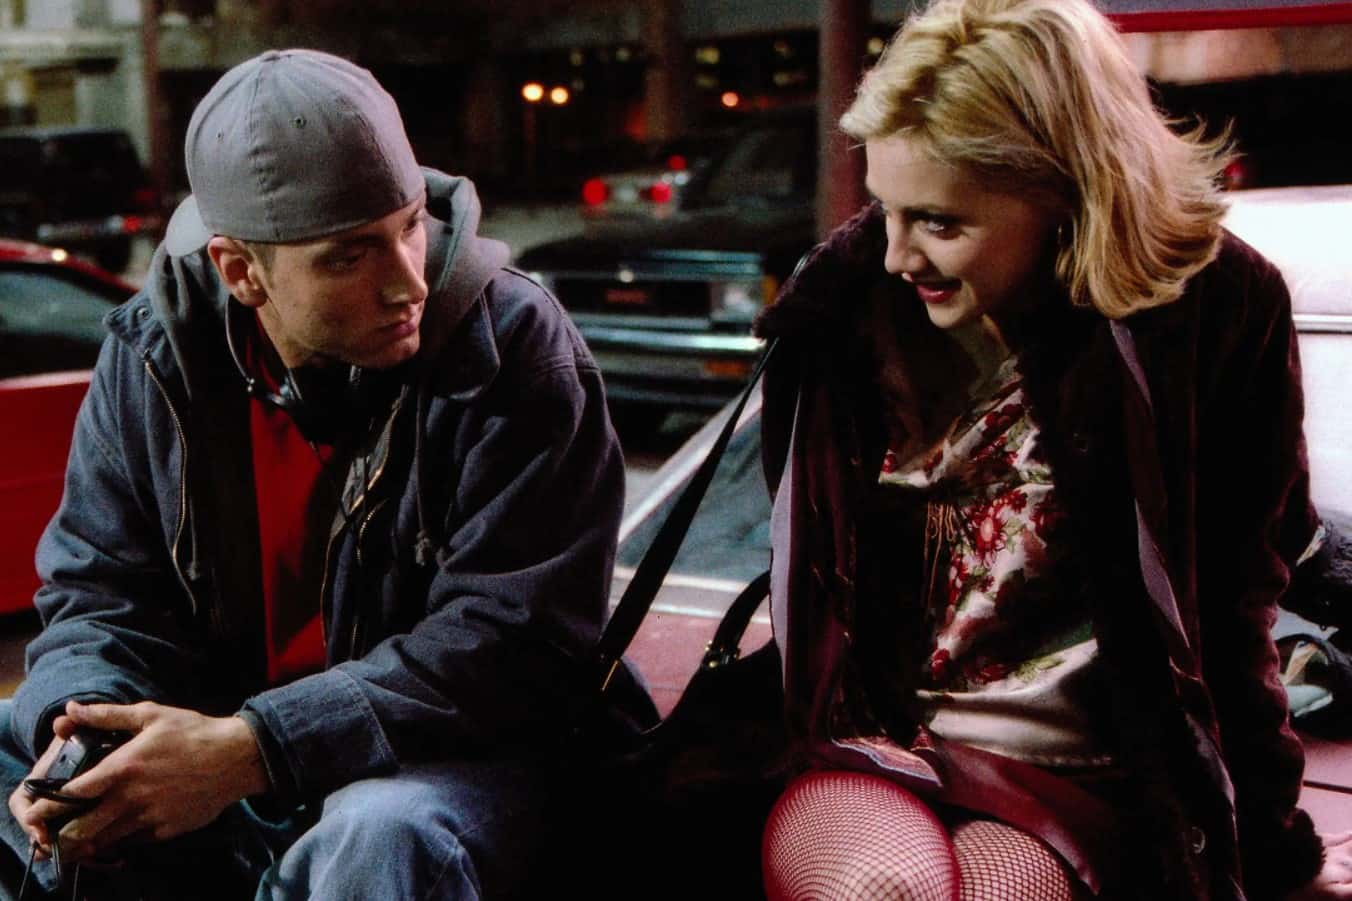 eminem and brittany murphy